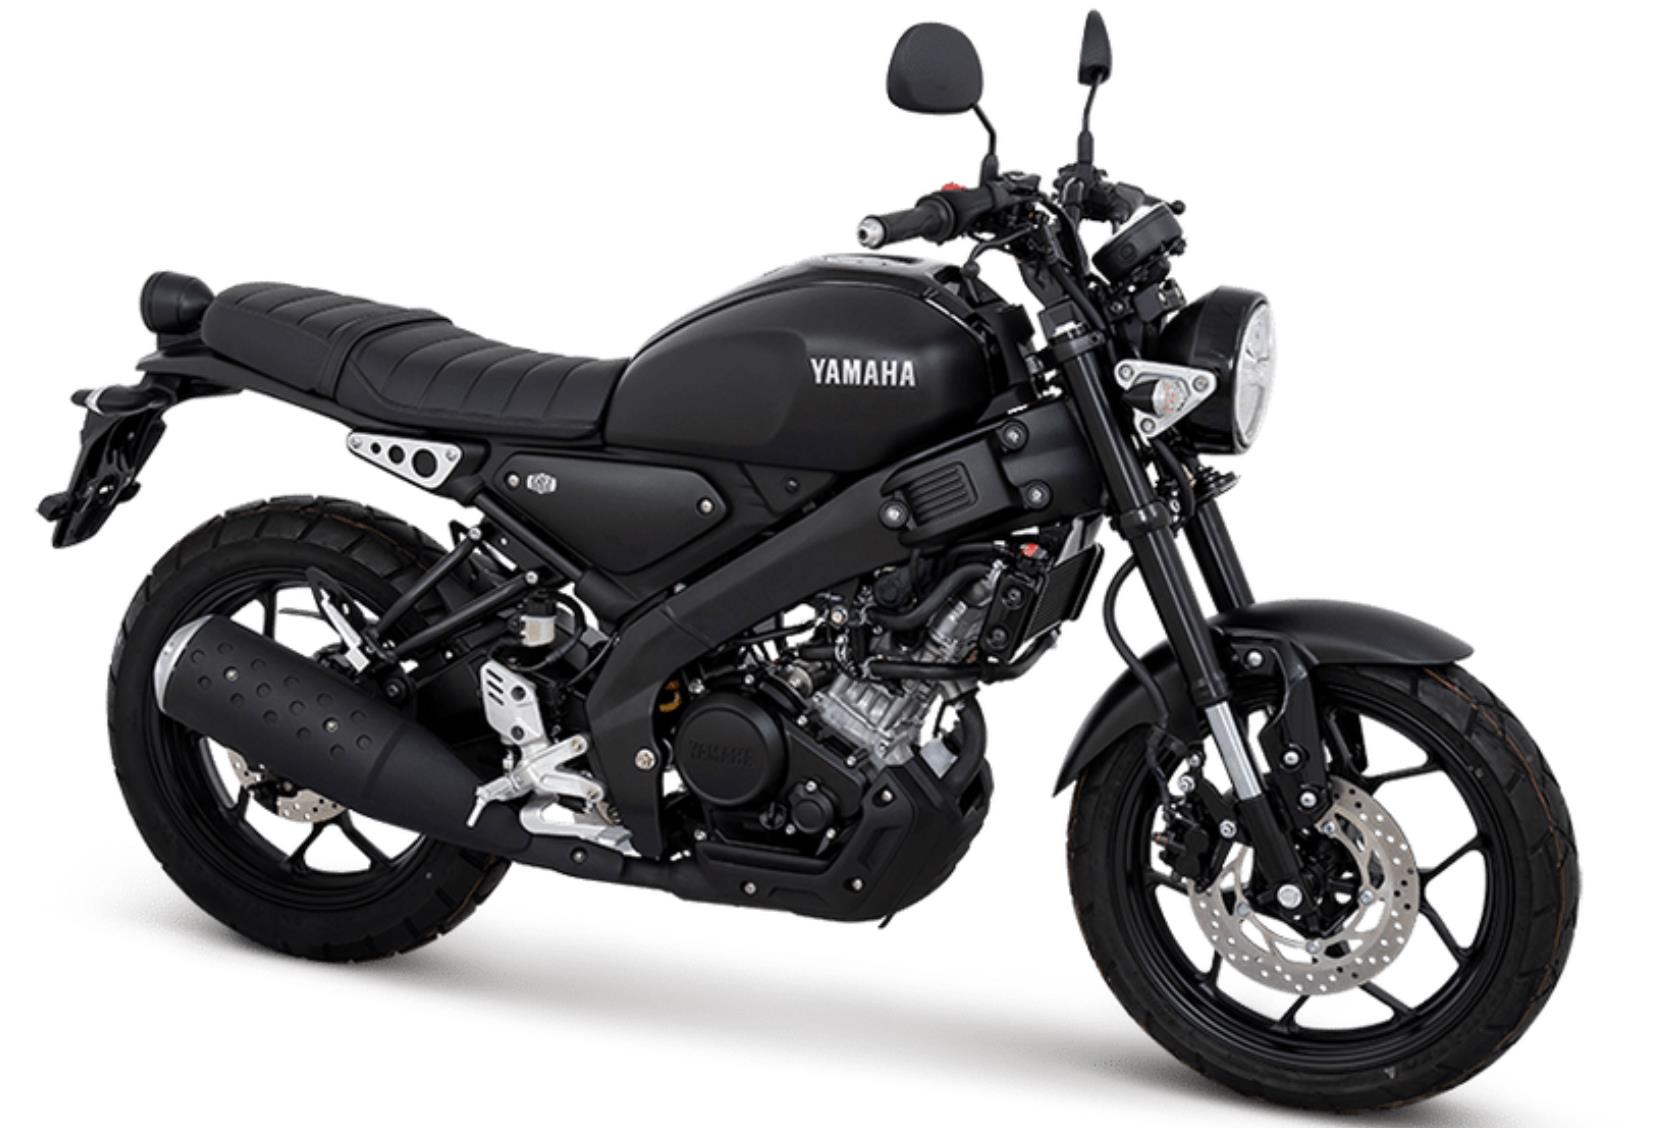 Yamaha XSR Price, Specs, Review, Pics & Mileage in India